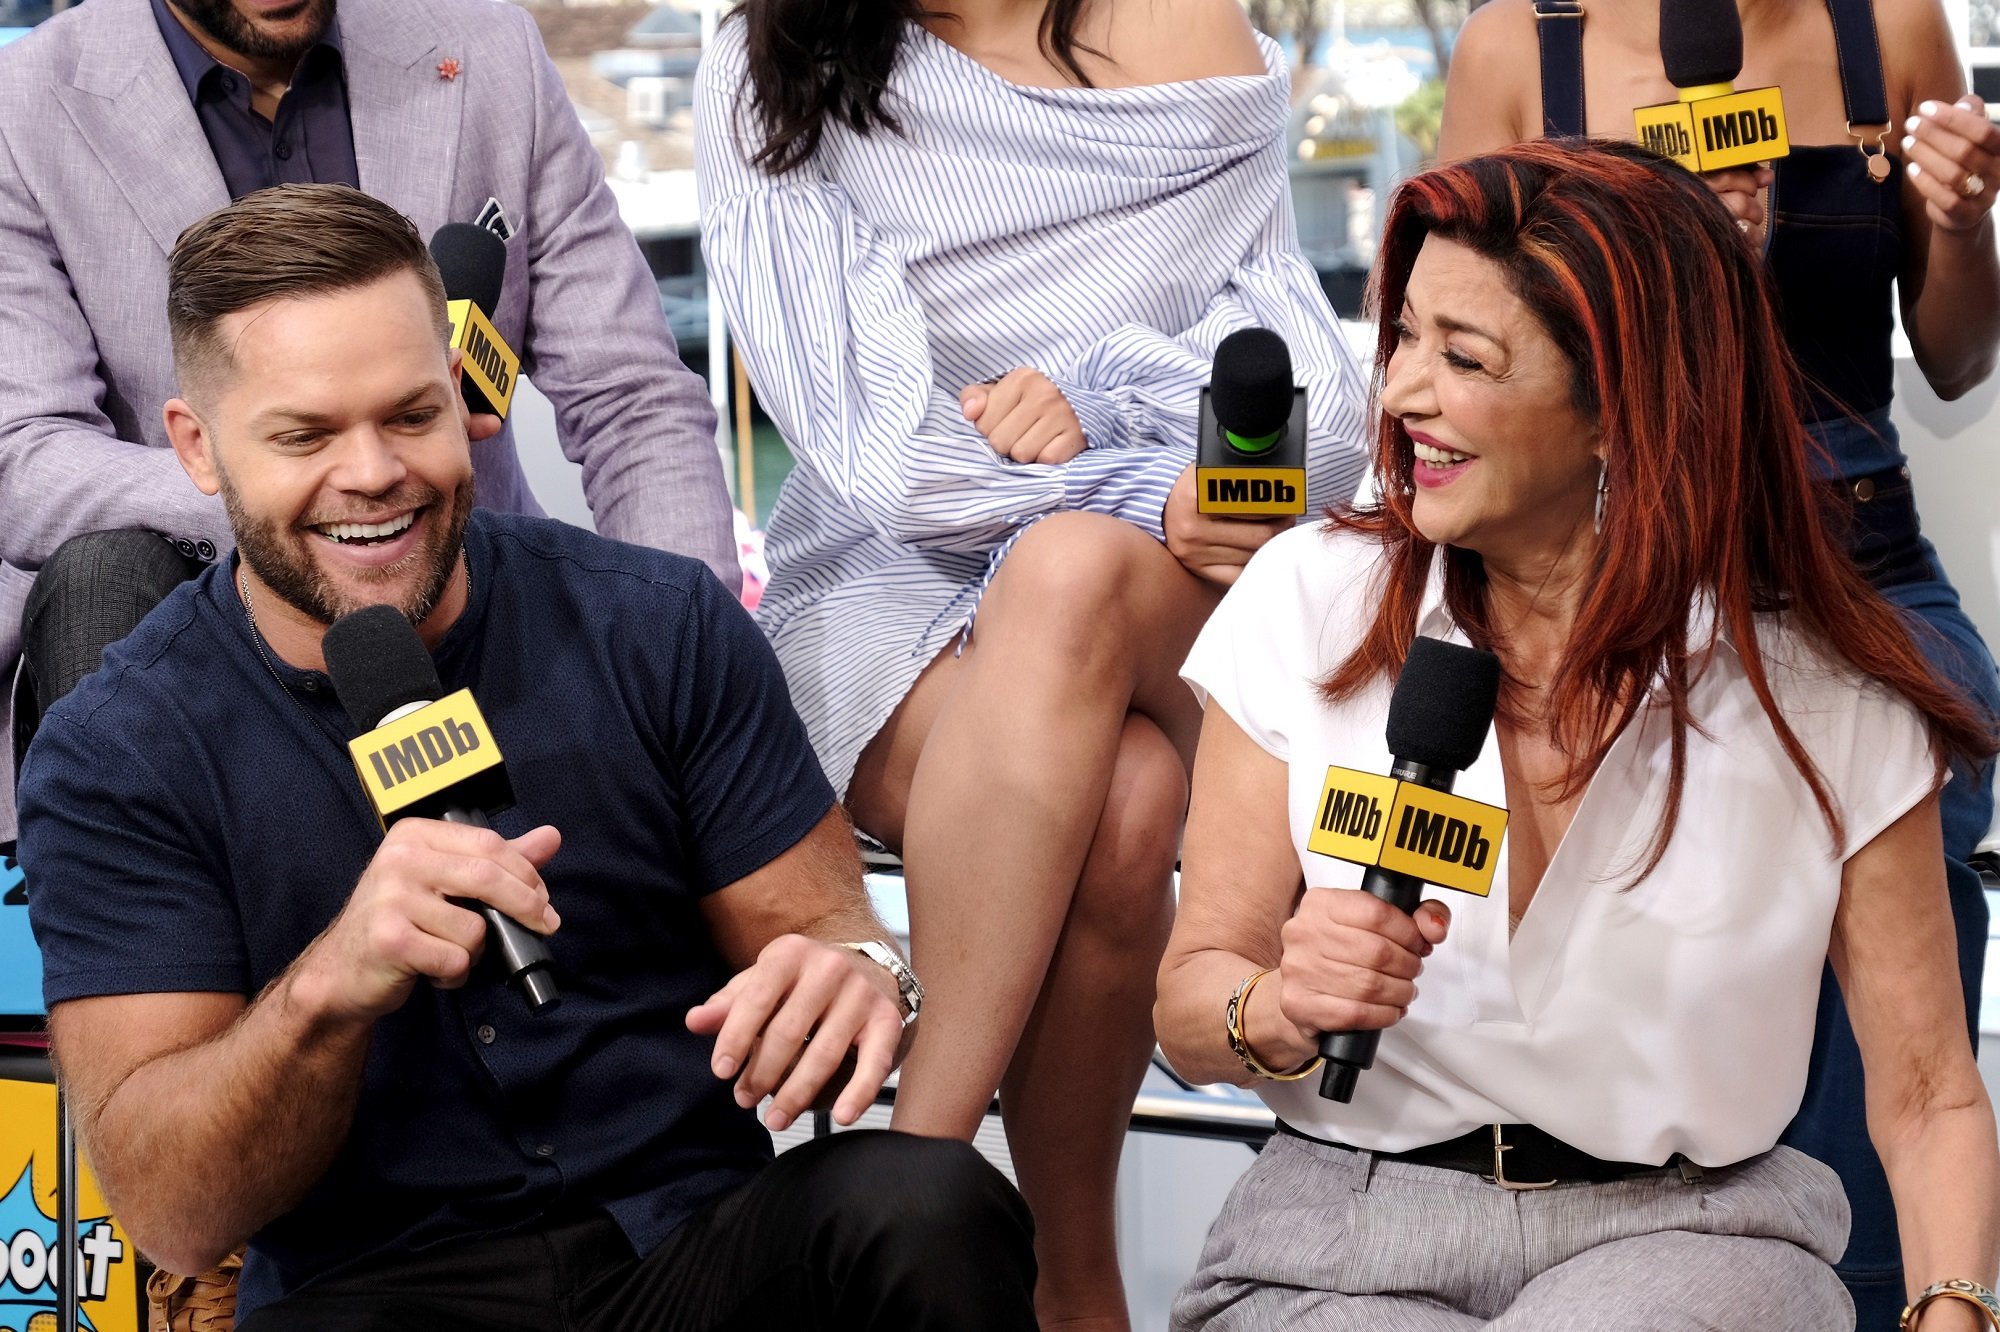 The Expanse Season 5 saw independent storylines for Wes Chatham and Shohreh Aghdashloo